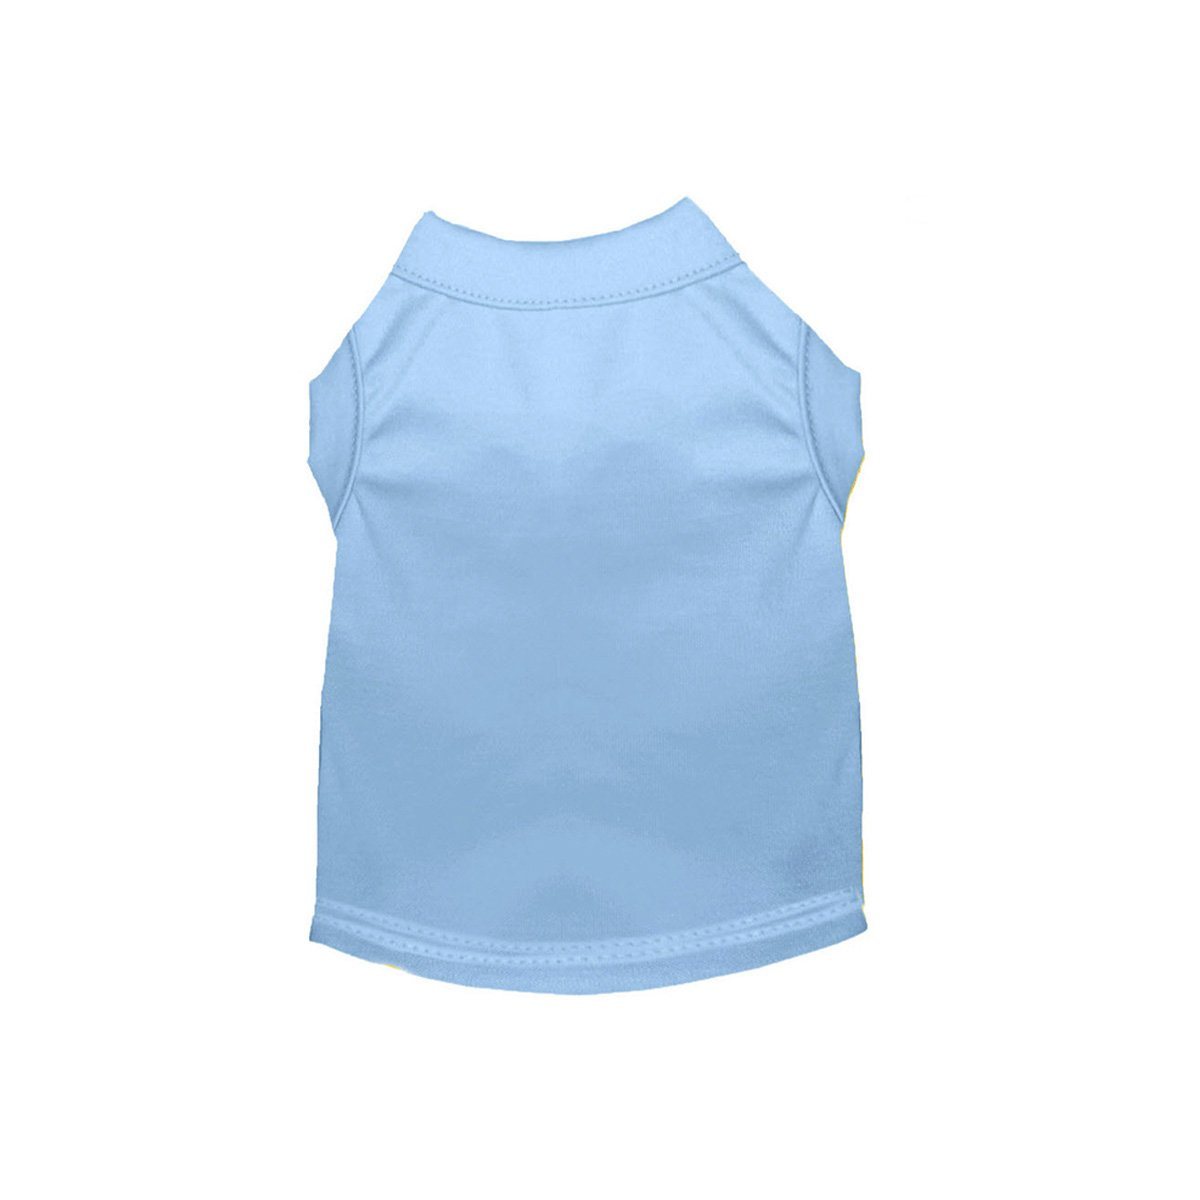 Cotton Poly Blend Tee Shirt in Blue | Pawlicious & Company